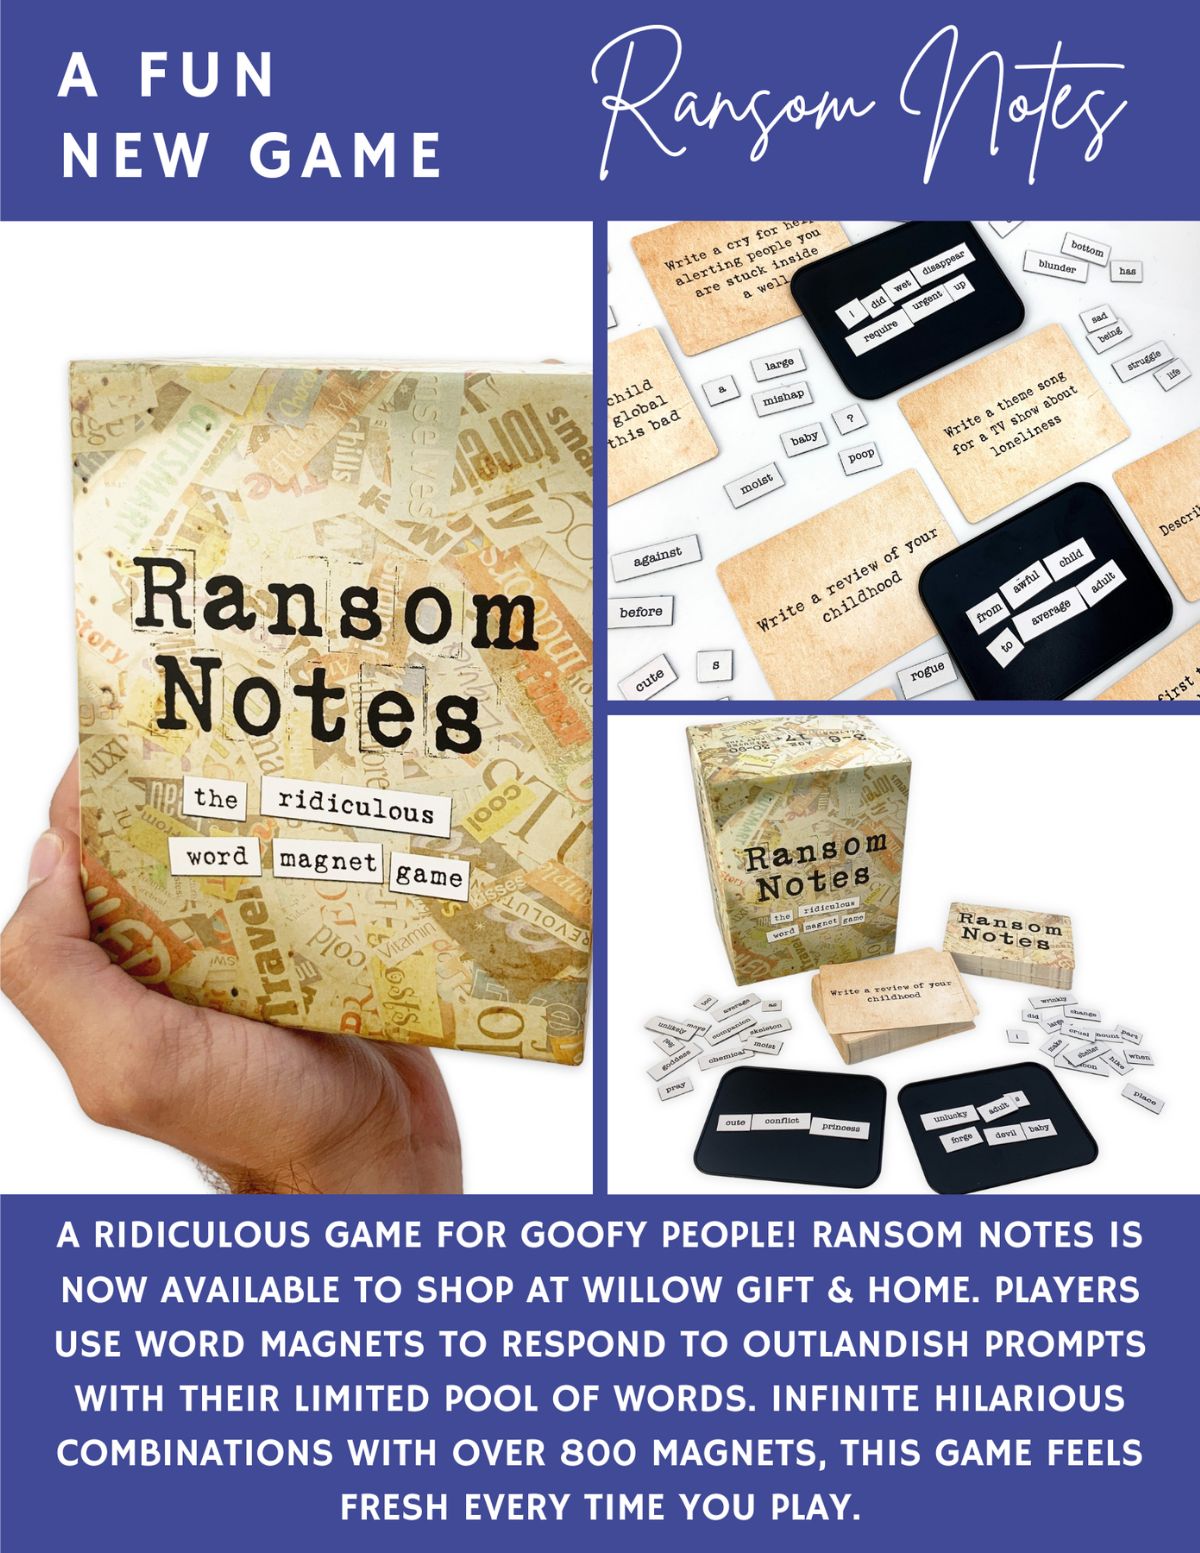 Ransom Notes fun game